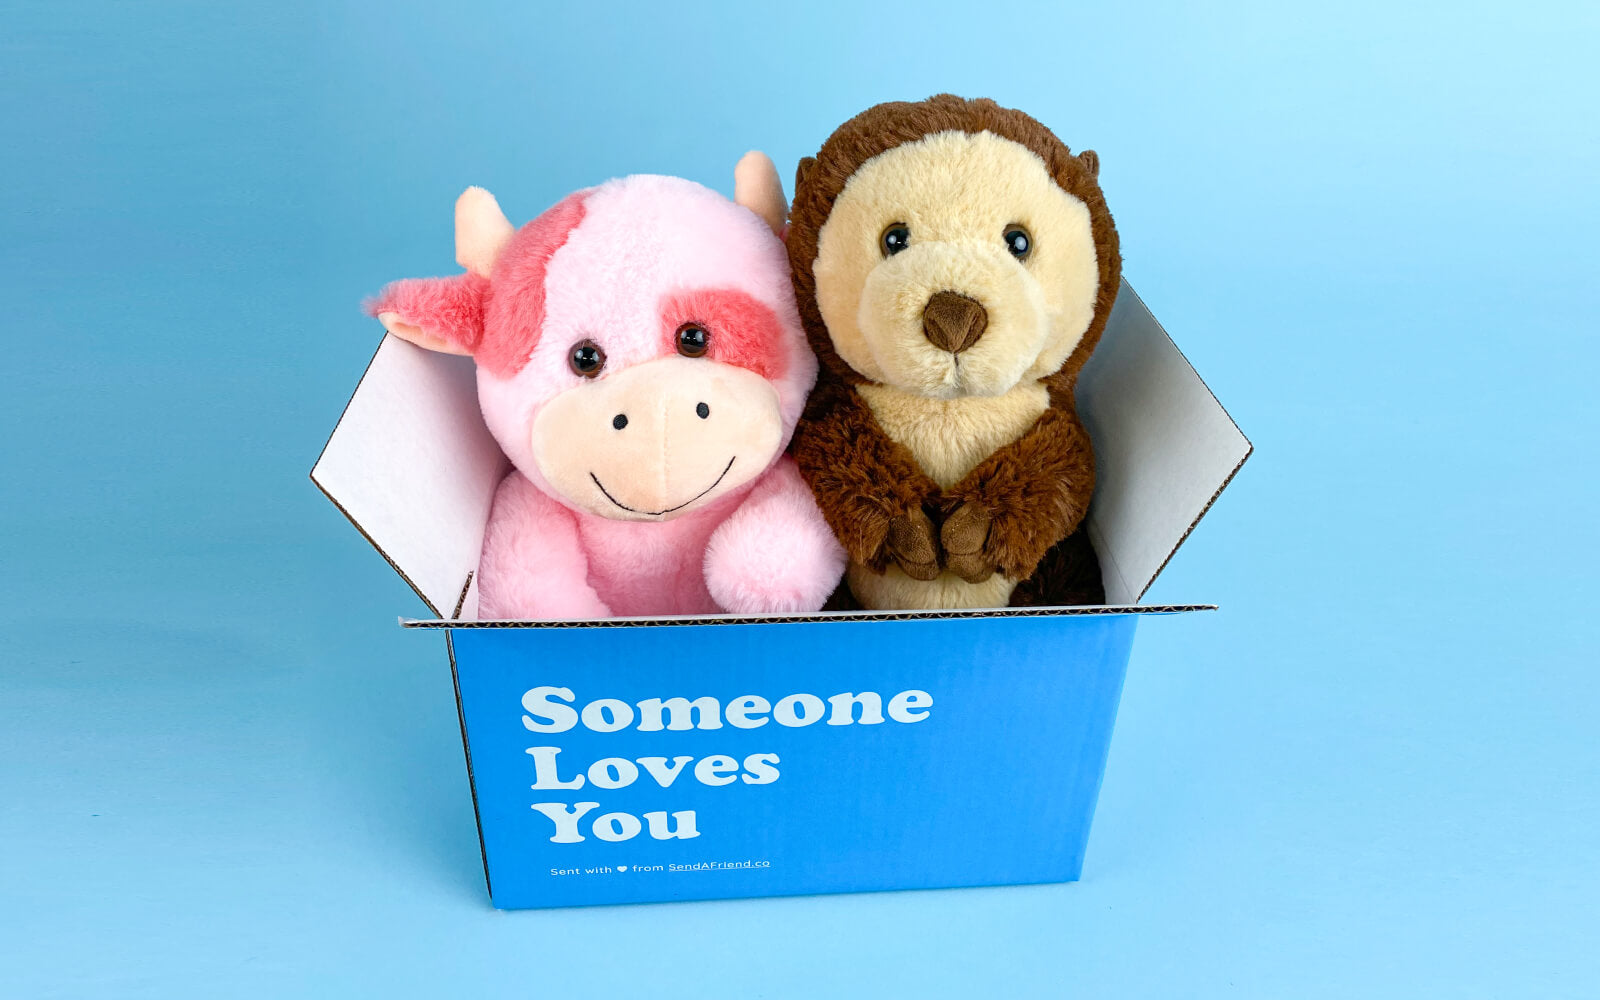 pink cow and otter stuffed animal in blue "someone loves you" box